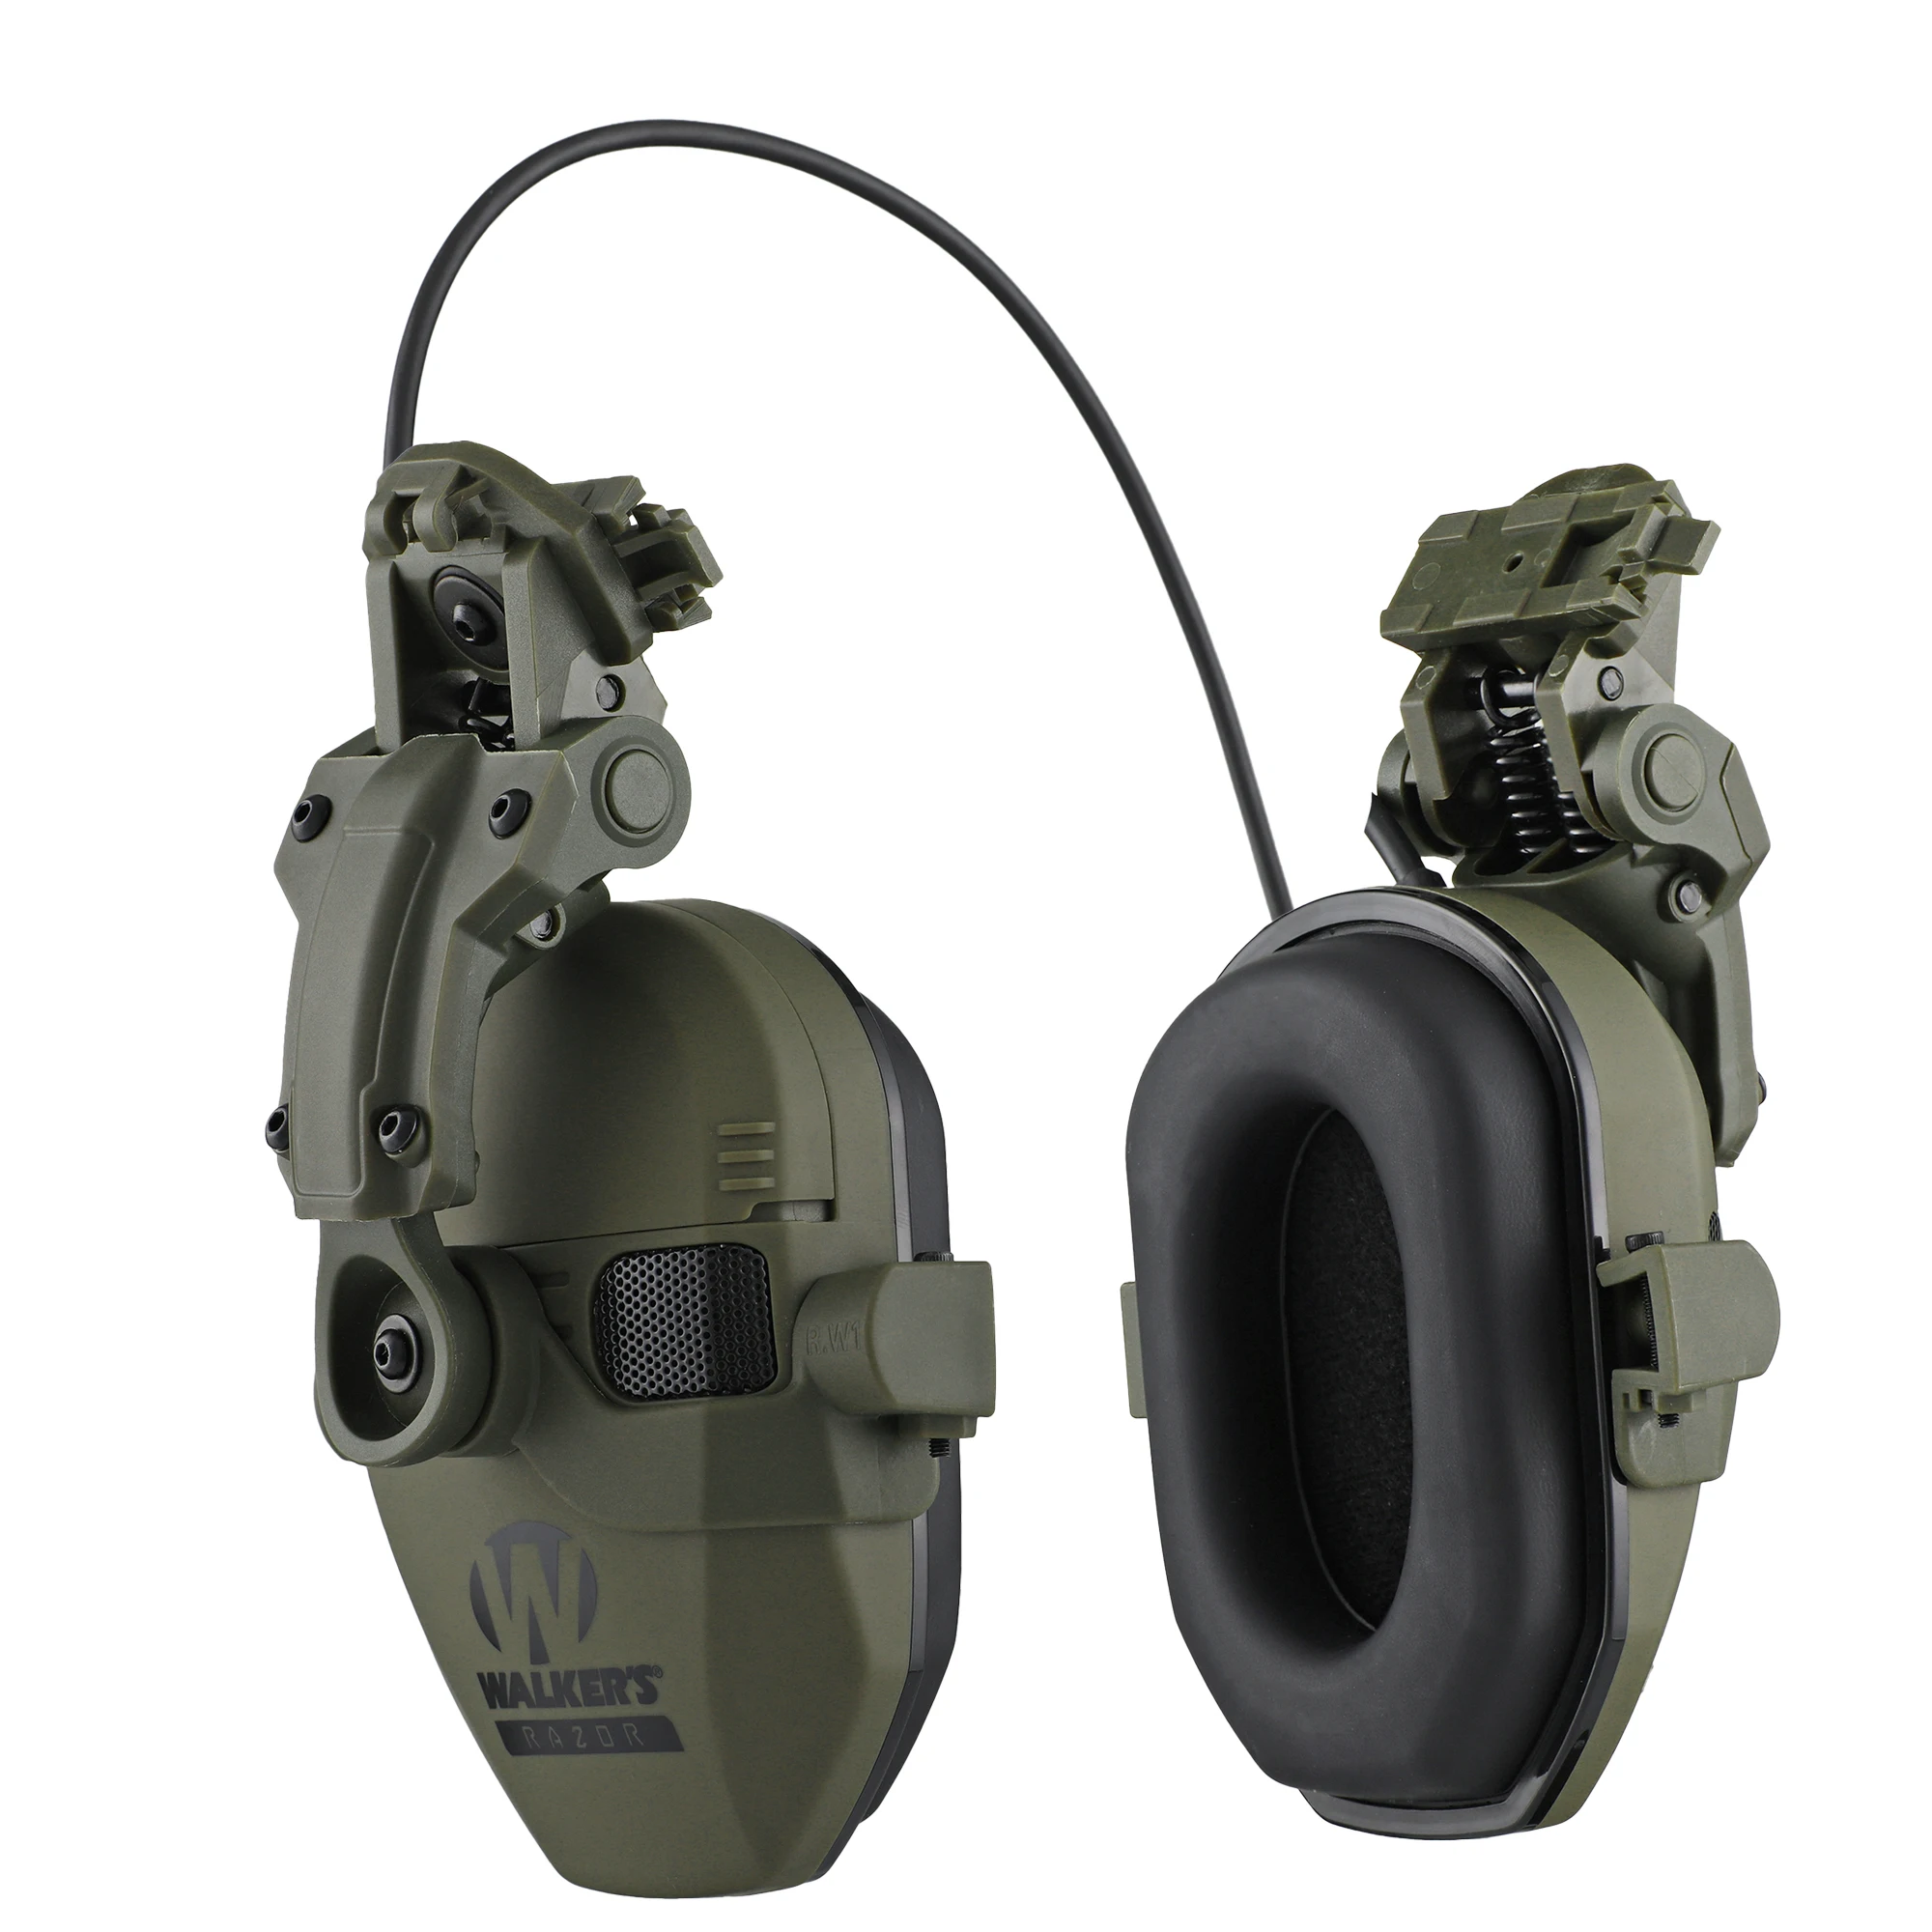 Alta Qualidade Tactical Hunting Shooting Headsets, Capacete ao ar livre Ouvido, Airsoft Paintball Headset, CS Wargame Headphone